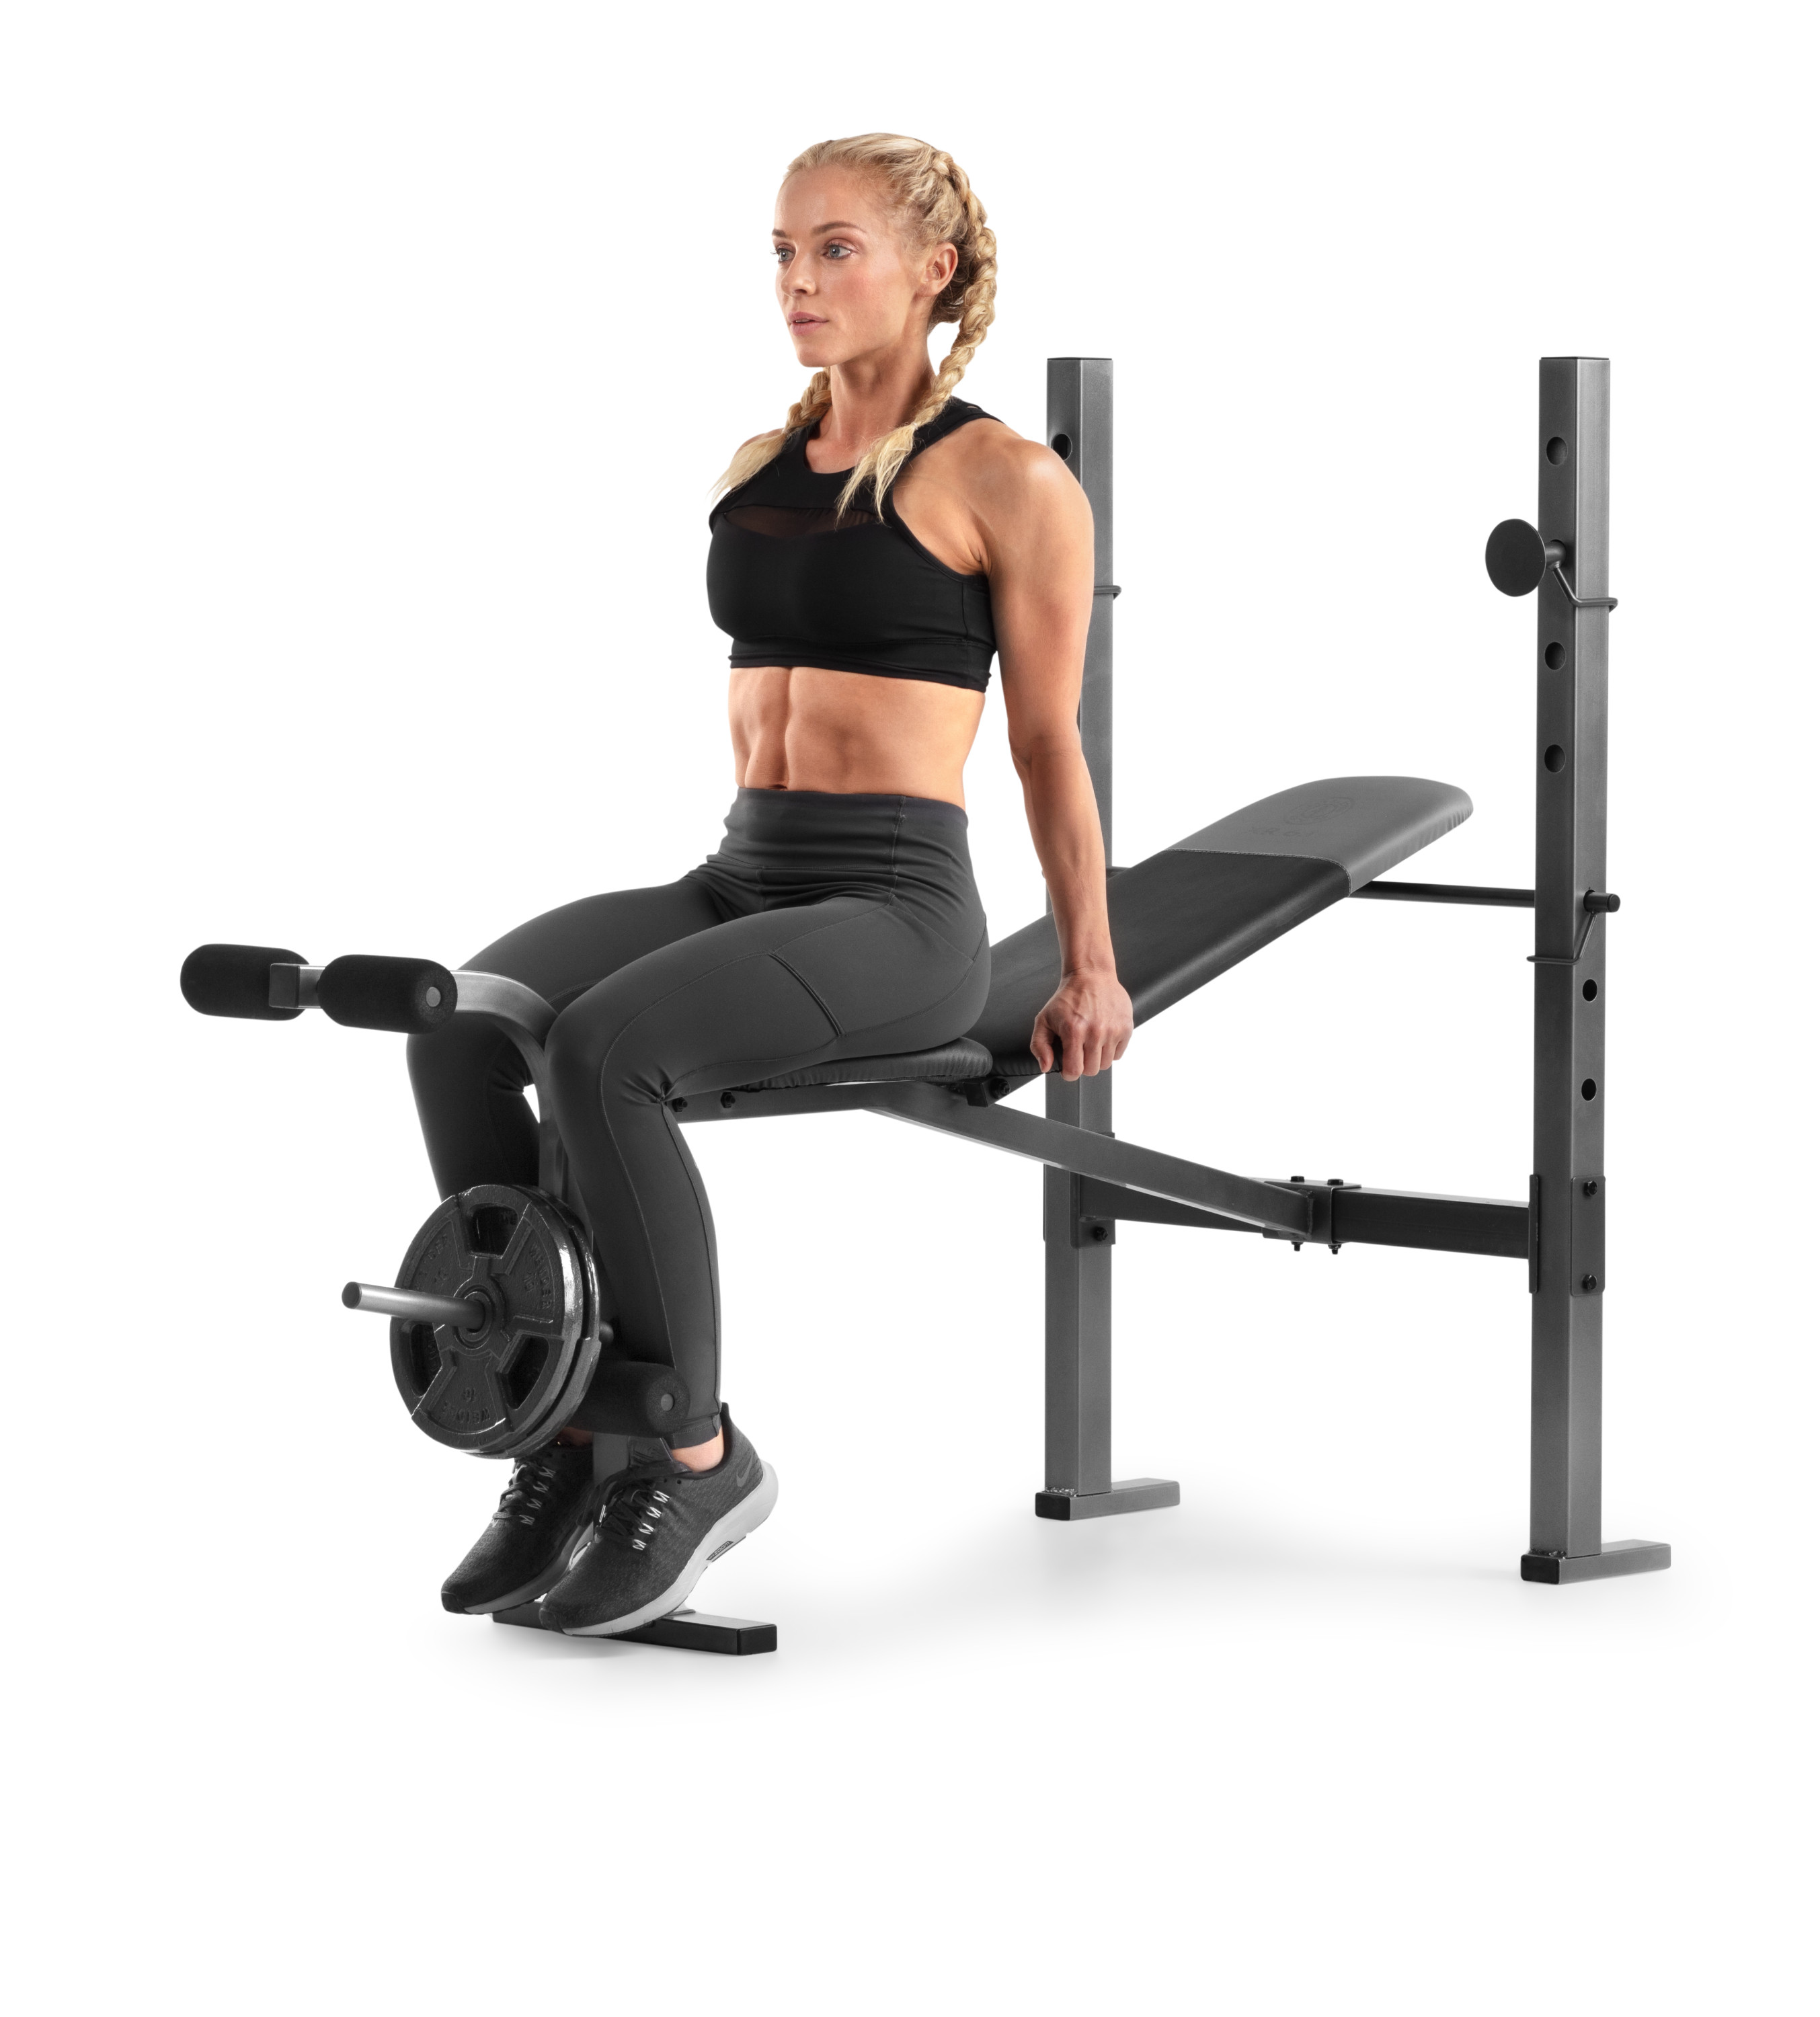 Weider XR 6.1 Adjustable Weight Bench with Leg Developer, 410 lb. Weight Limit - image 8 of 12